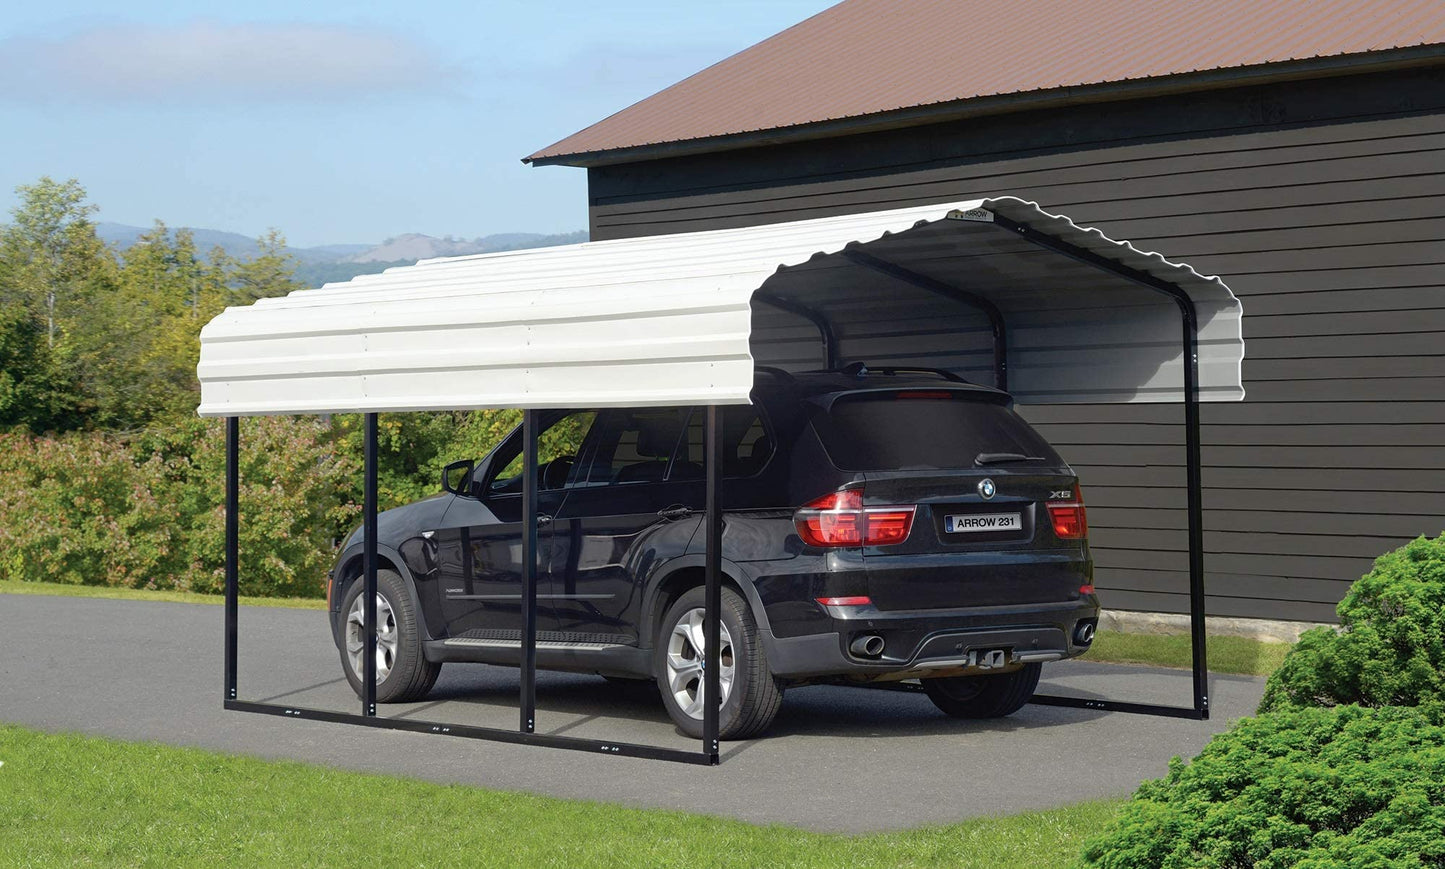 Arrow Shed 10' x 15' x 7' Carport Car Canopy with Galvanized Steel Horizontal Roof, Garage Shelter for Cars and Boats, Eggshell Carport Only 10' x 15' x 7'